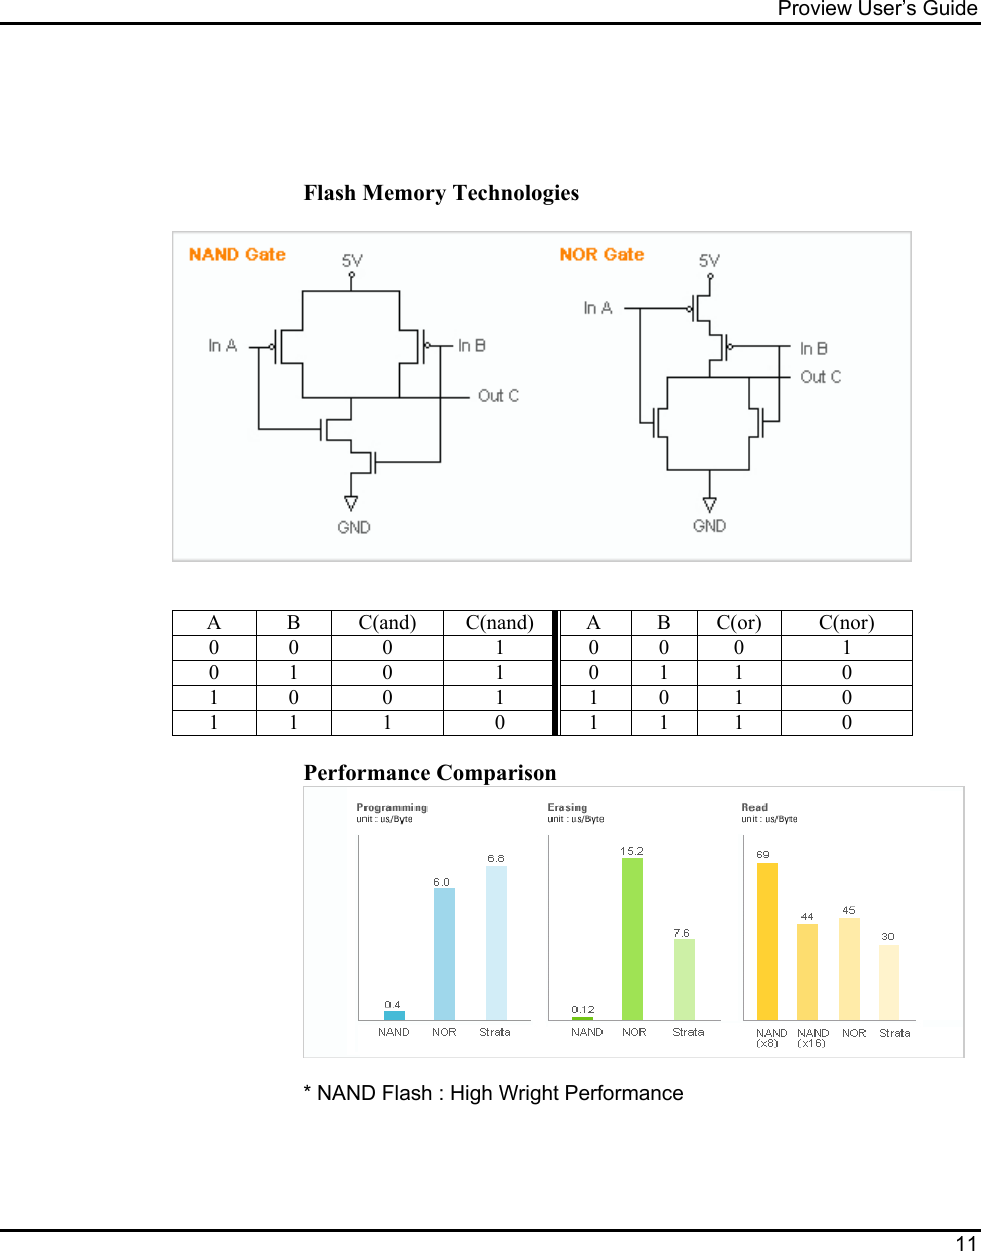 Proview User’s Guide  11      Flash Memory Technologies     A B C(and) C(nand) A B C(or) C(nor) 0 0 0  1 0 0 0  1 0 1 0  1 0 1 1  0 1 0 0  1 1 0 1  0 1 1 1  0 1 1 1  0  Performance Comparison   * NAND Flash : High Wright Performance  